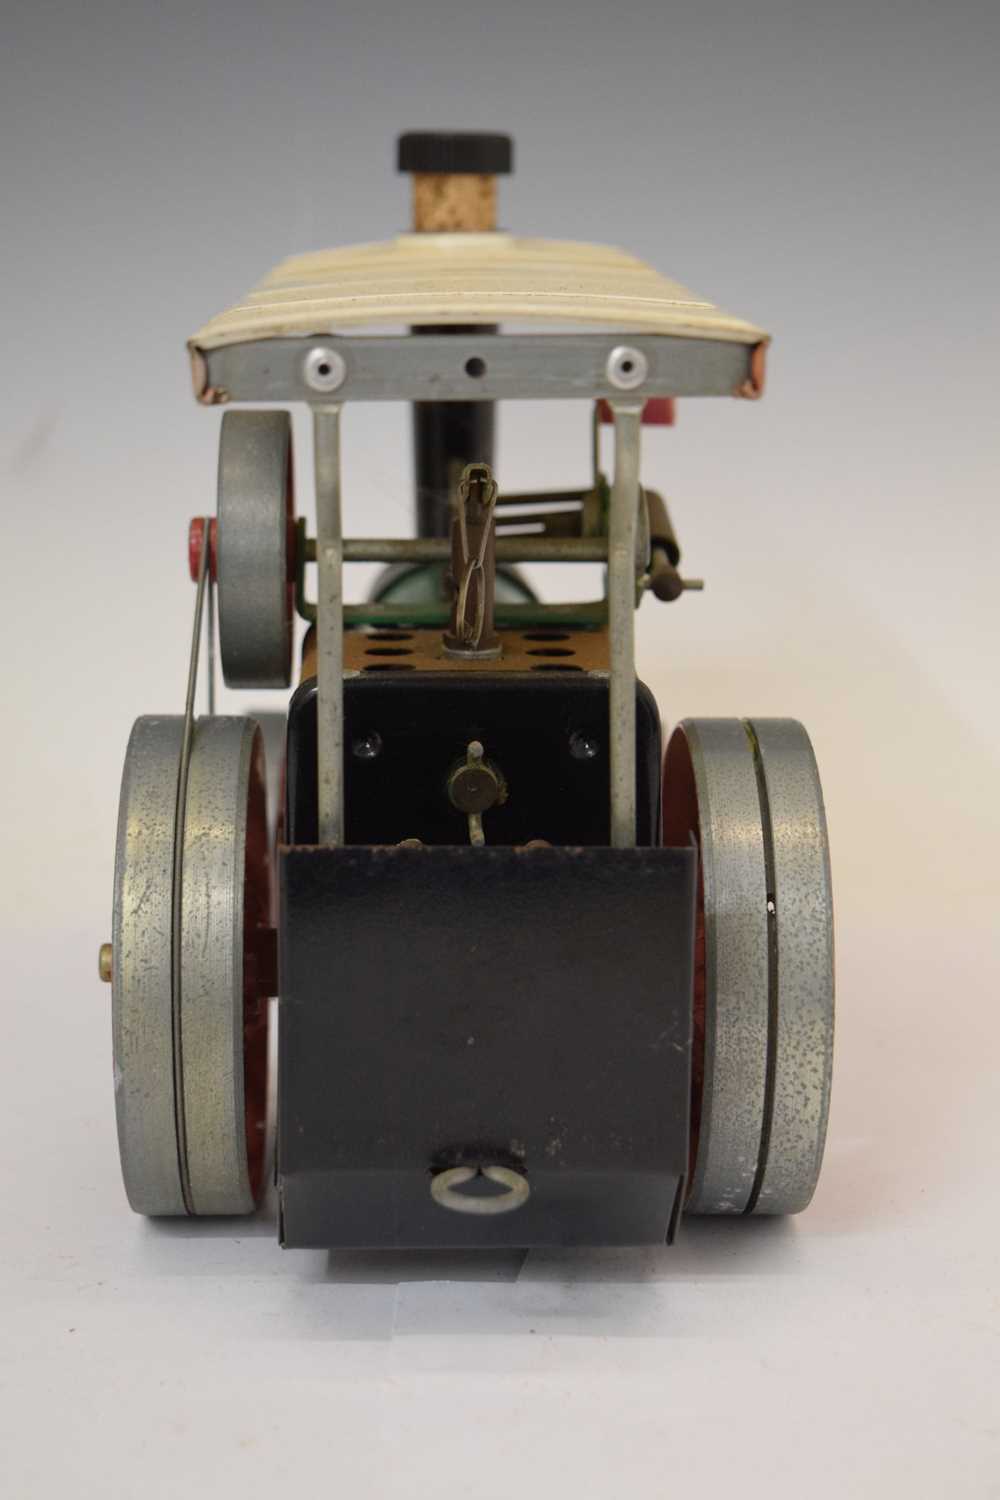 Mamod - TE1A live steam tractor - Image 8 of 9